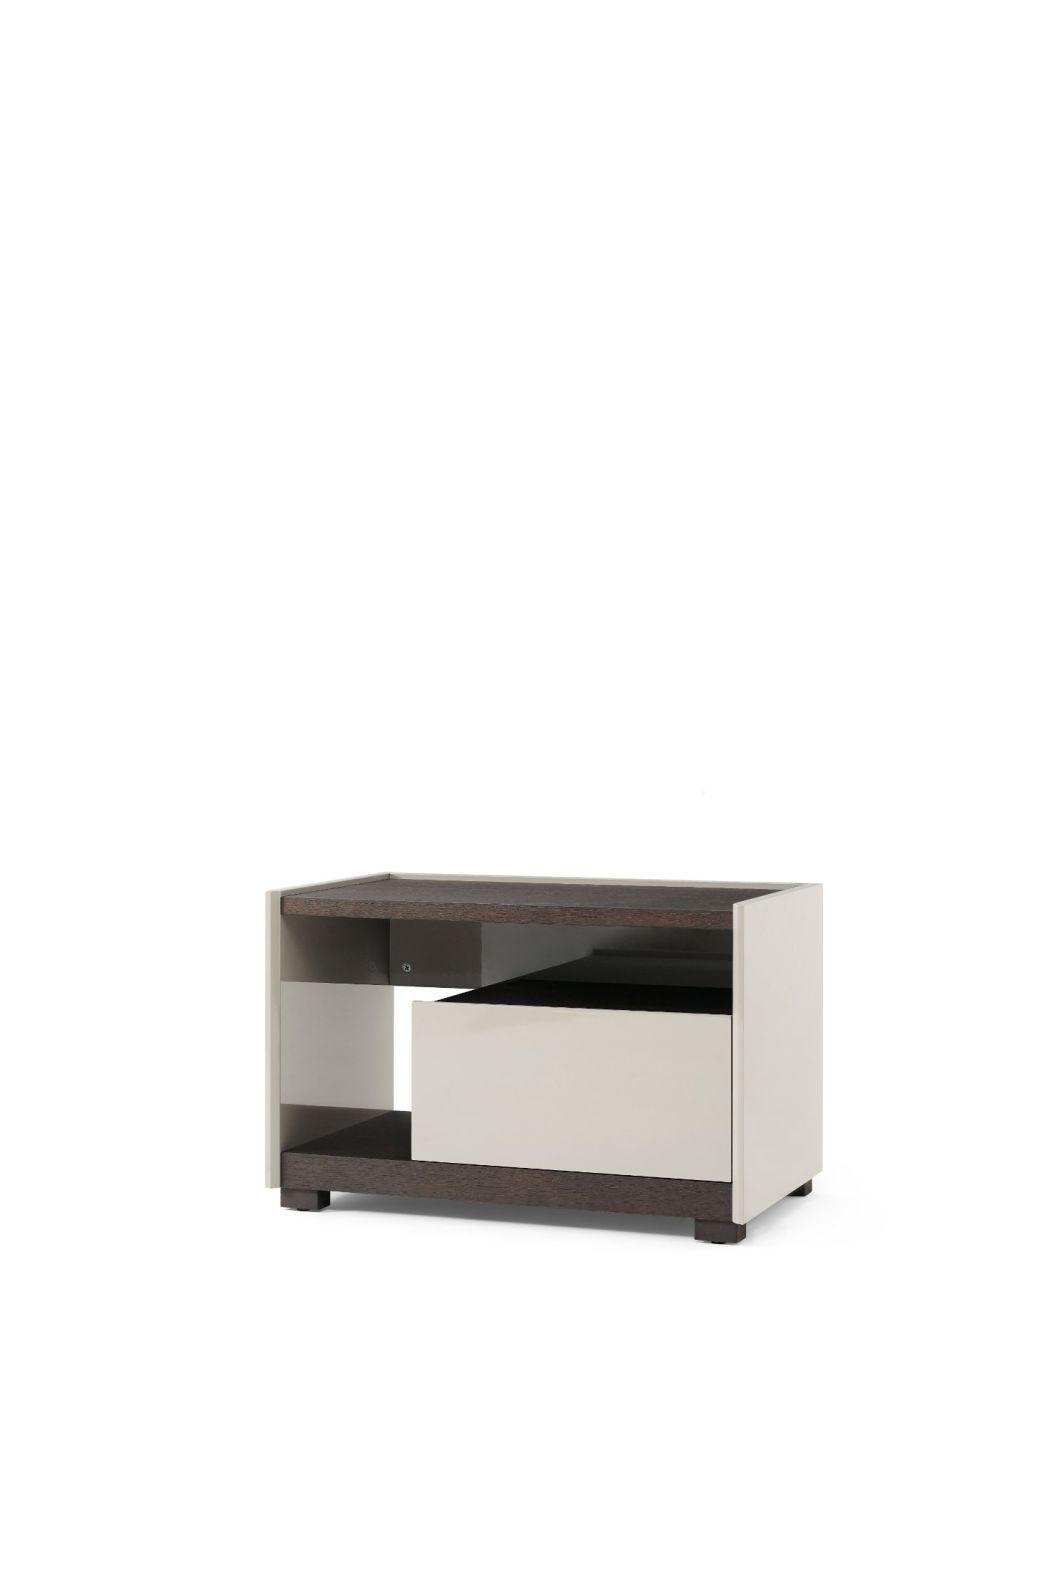 S-Ctg011b Italian Design Night Stand, Wooden Night Stand in Bedroom Set.